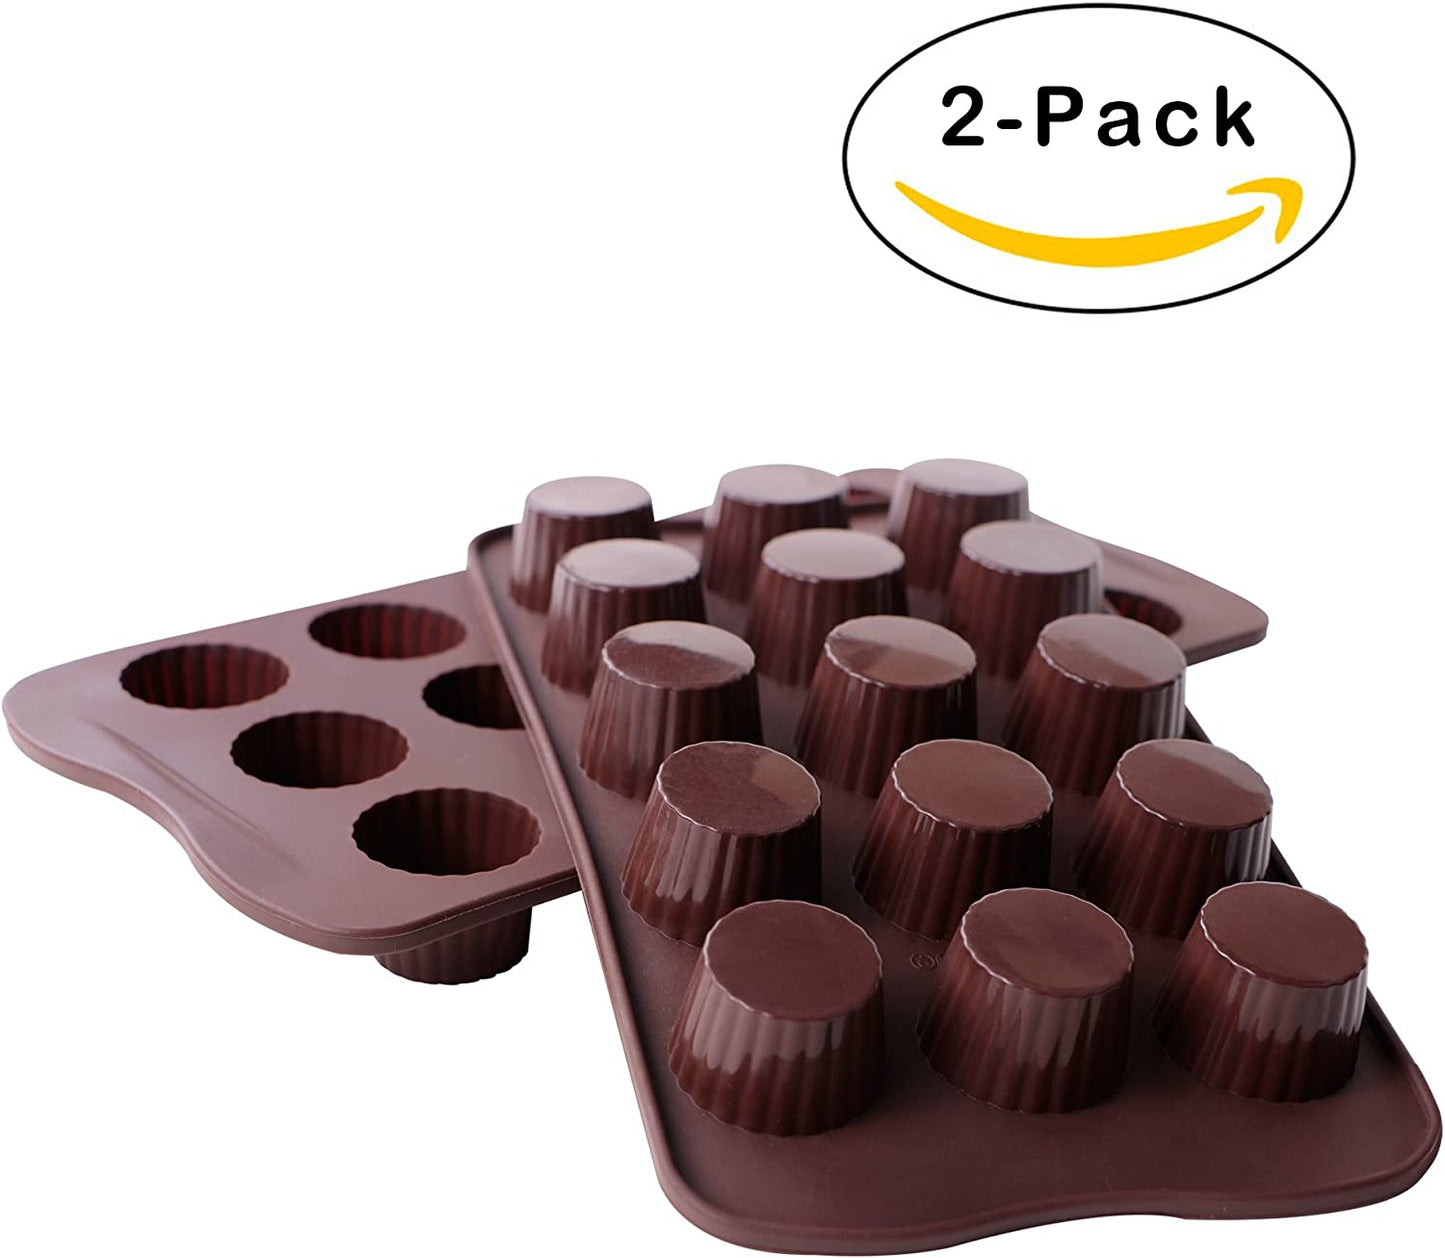 Webake Chocolate Candy Molds Silicone Baking Mold for Snack Size Peanut Butter Cup, Jello, Keto Fat Bombs and Cordial, Pack of 2